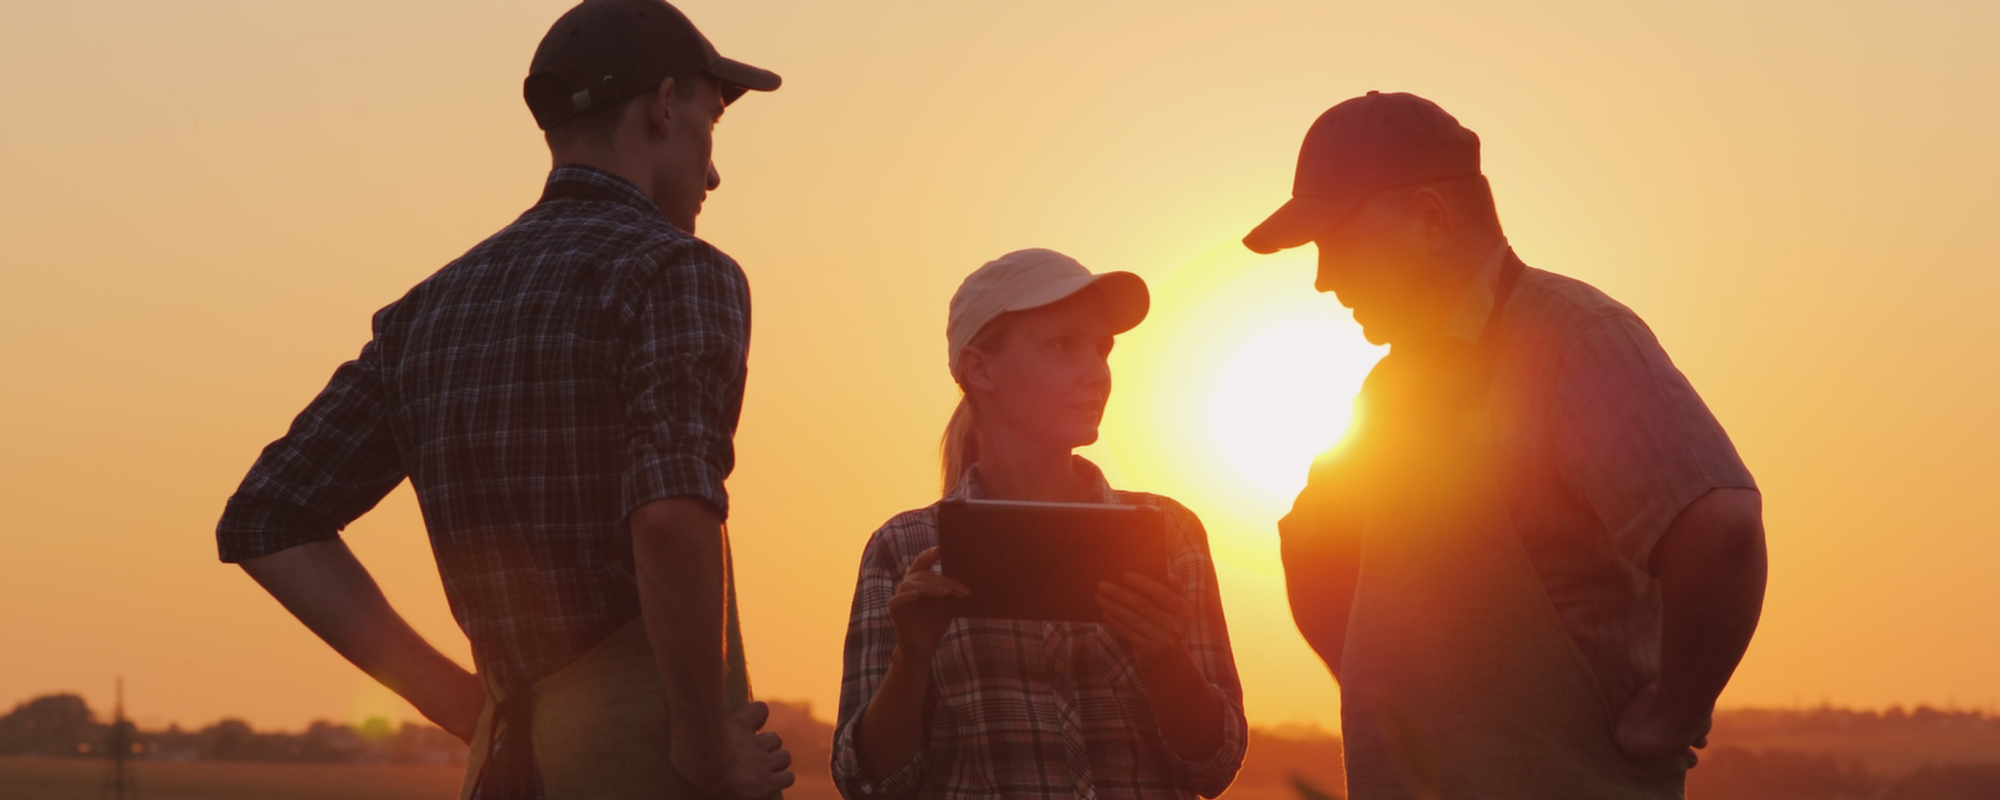 3 farmers talking in the field during sunset